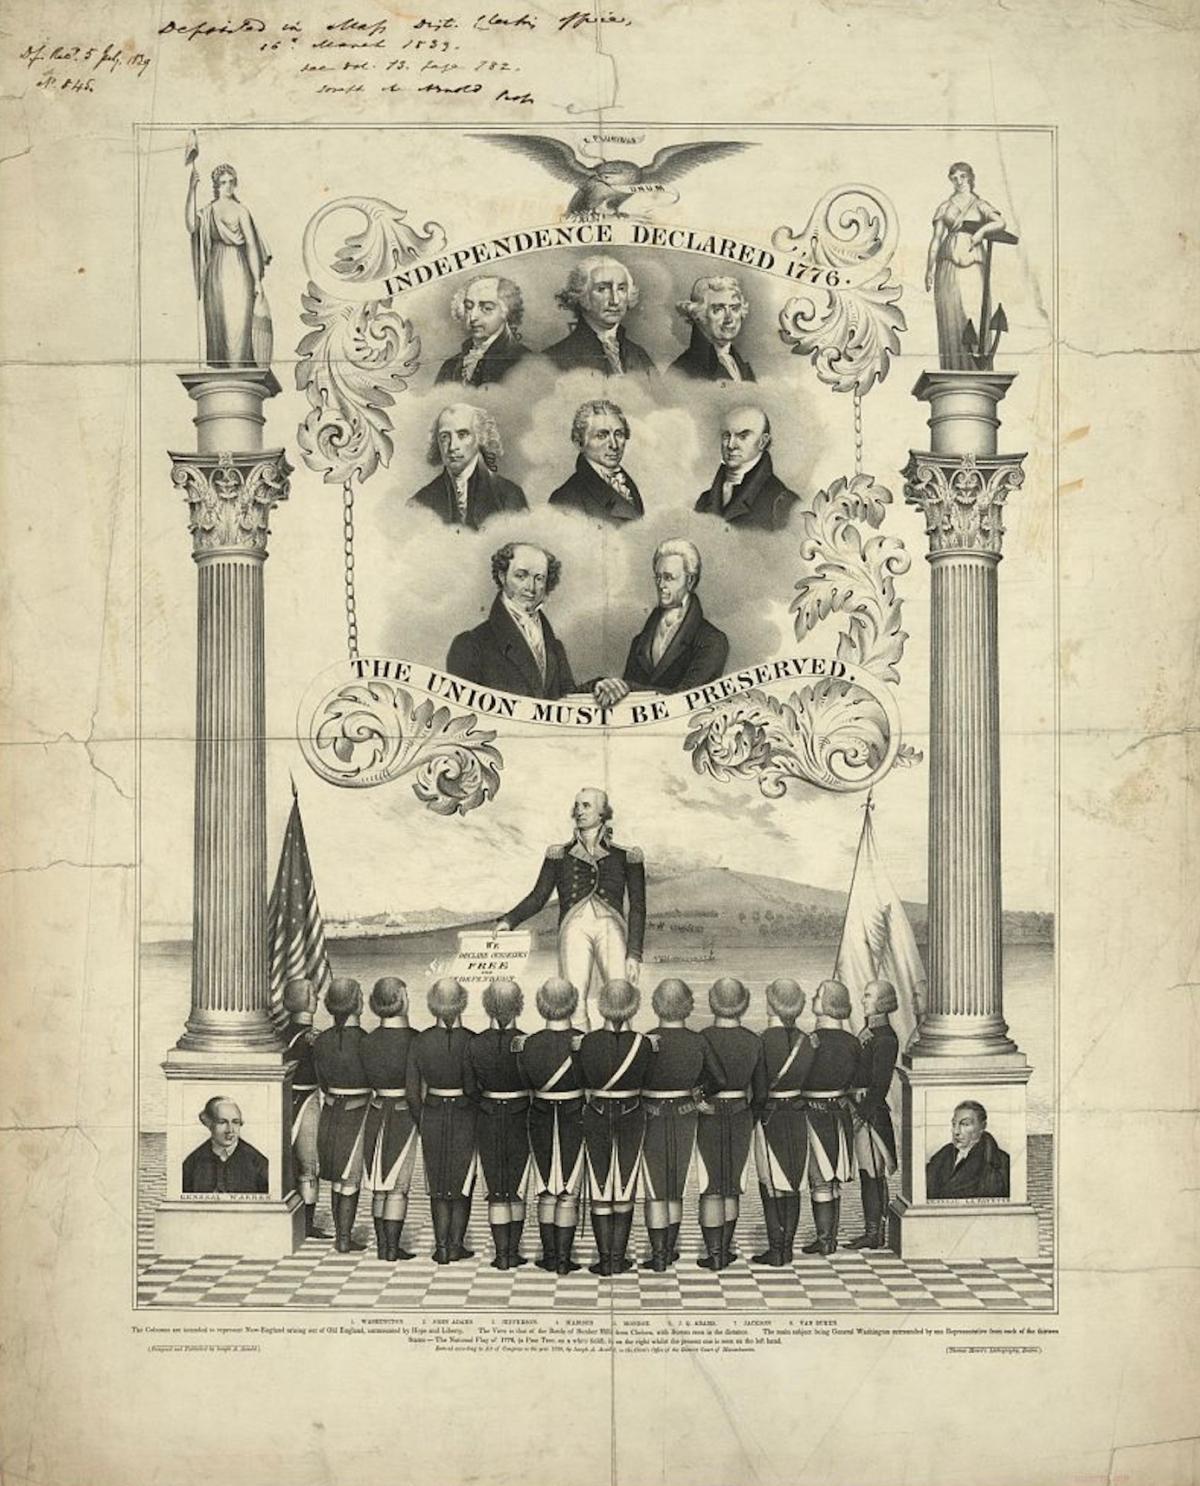 A memorial to the Declaration of Independence and the American Revolution. On the column bases are portraits of American Revolutionary War general Joseph Warren (left) and the Marquis de Lafayette. “Independence declared 1776,” designed by Joseph A. Arnold with lithograph by Thomas Moore, 1839. Library of Congress. (Public Domain)